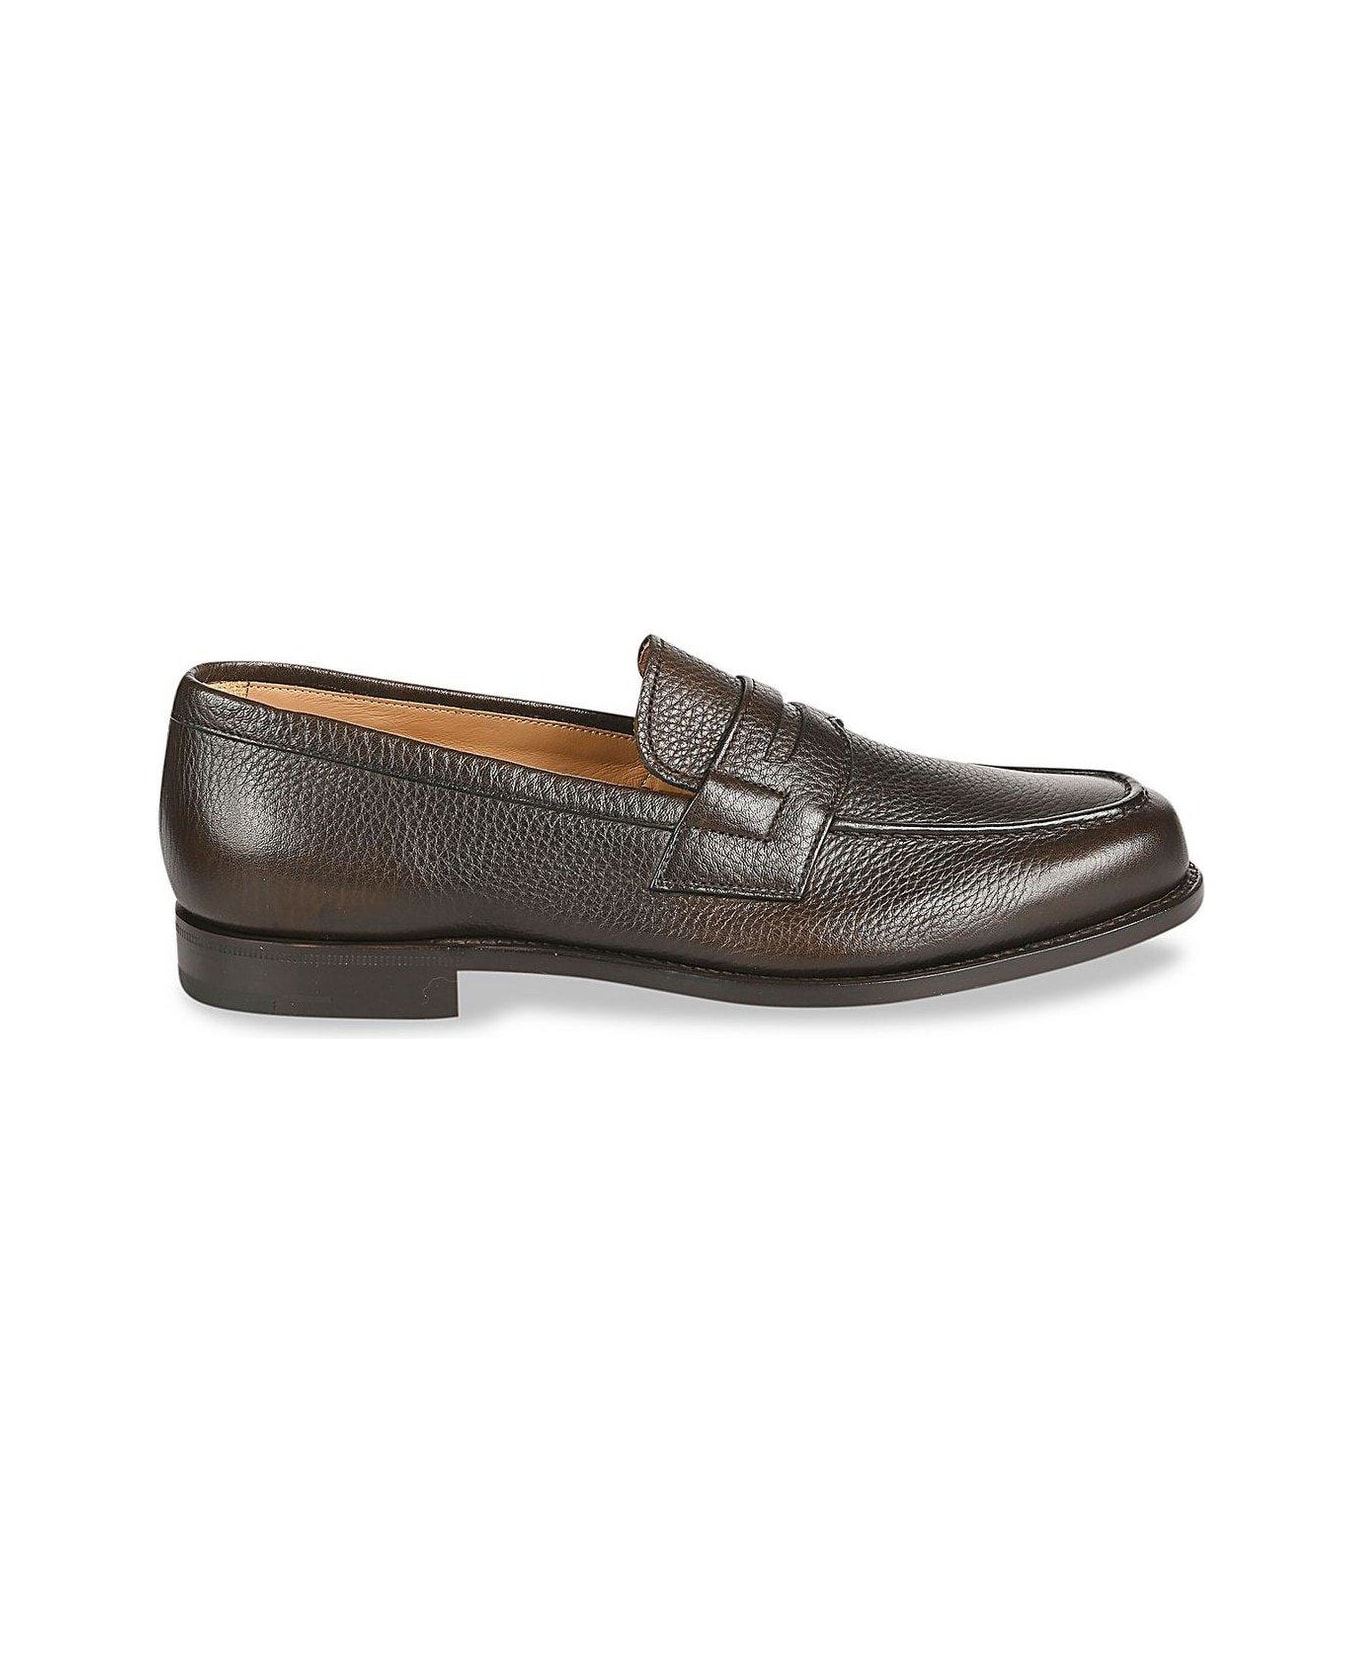 Church's Heswall Slip-on Loafers - Marrone scuro